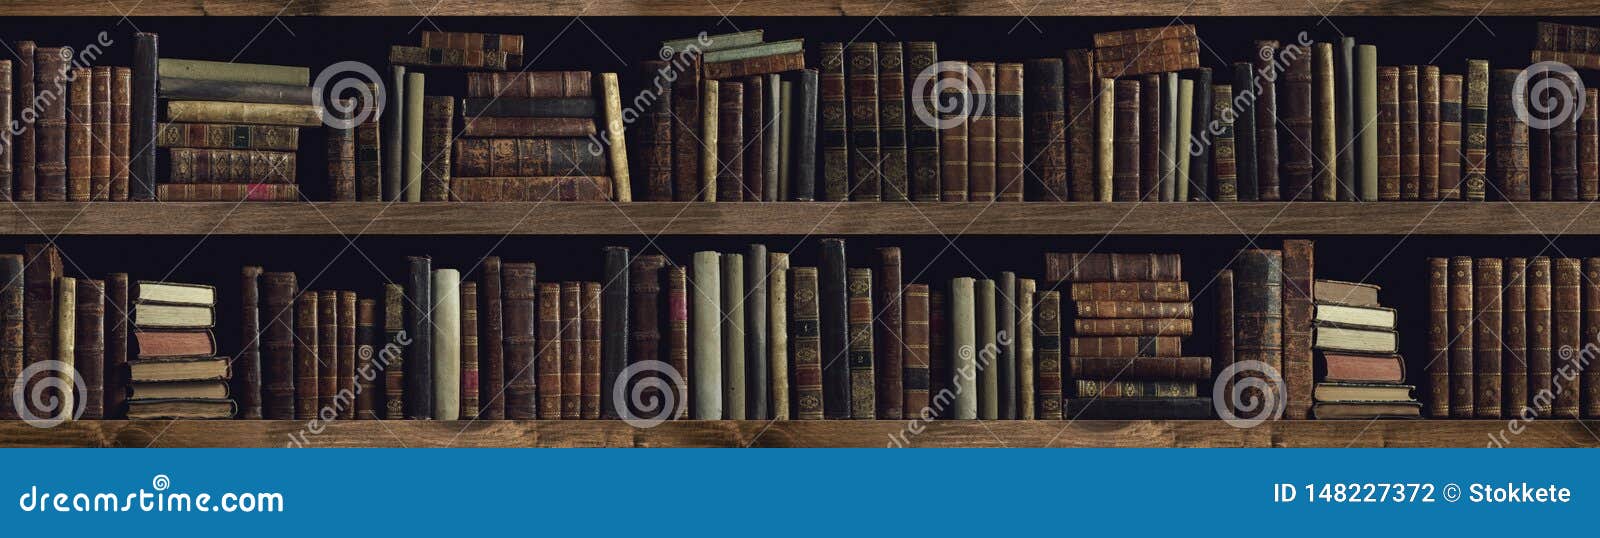 collection of valuable ancient books on a bookshelf